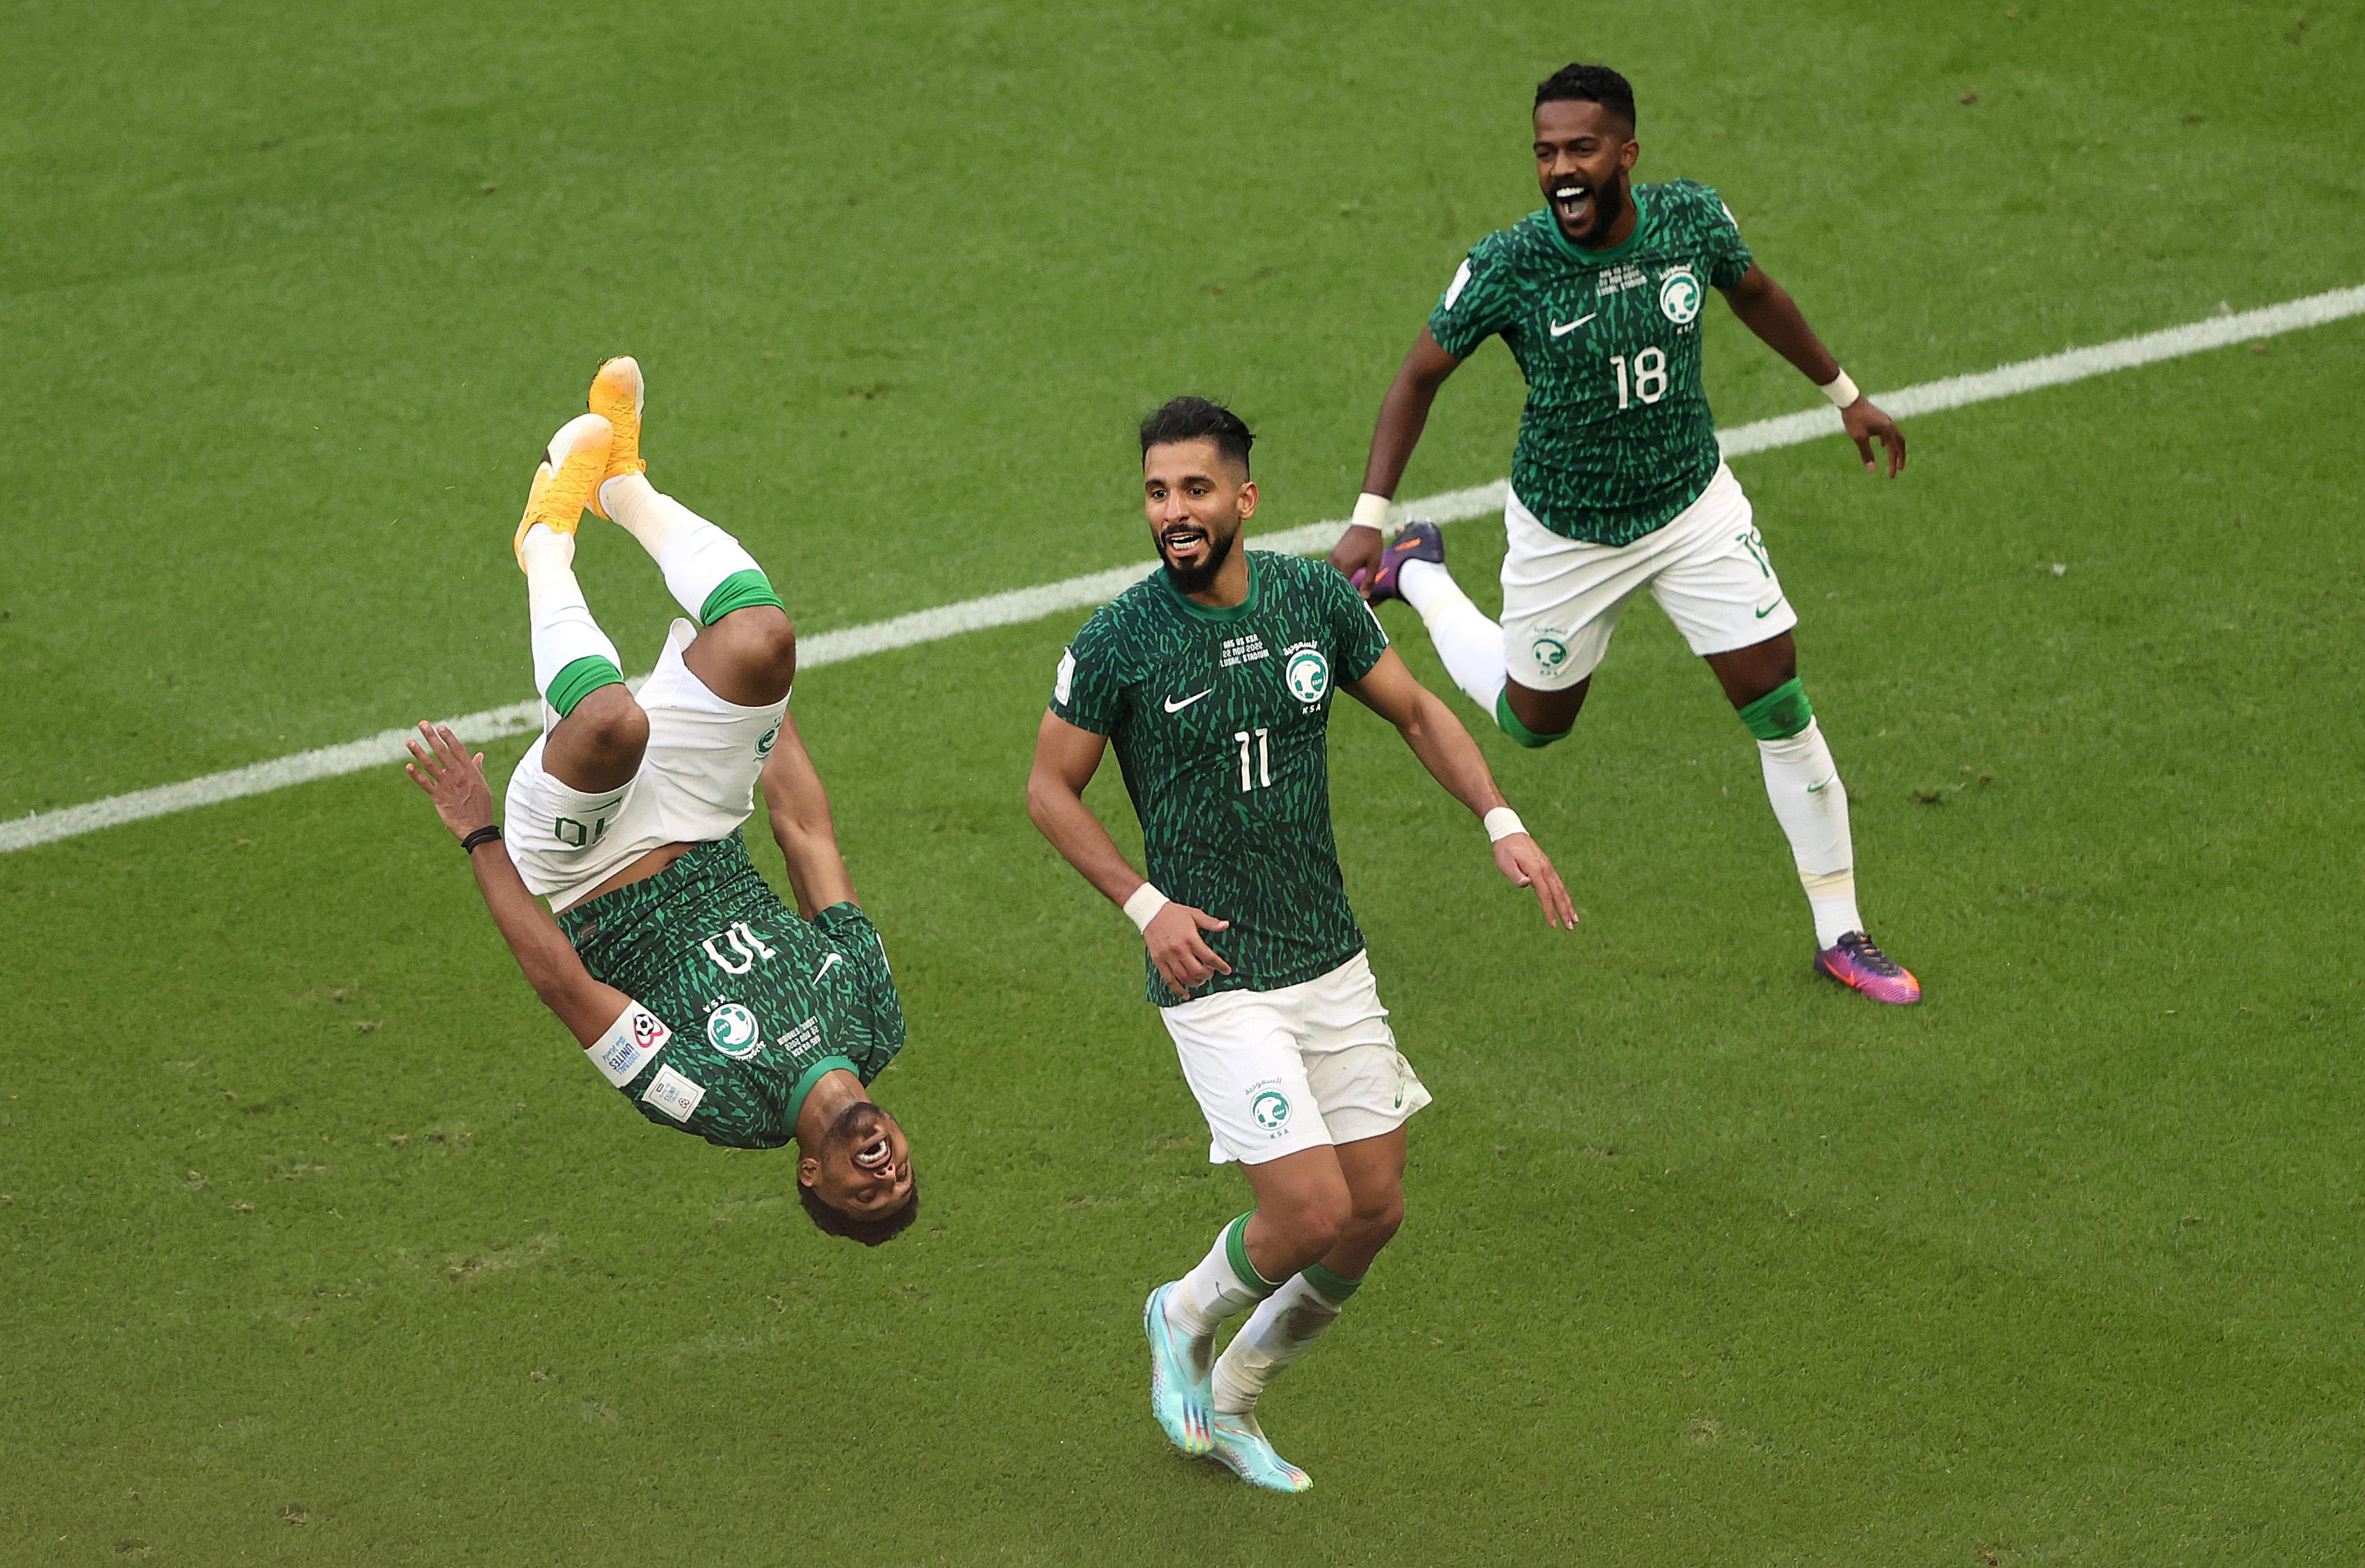 Saudi Arabia win over Argentina at the World Cup no one in the world is happier than this guy.